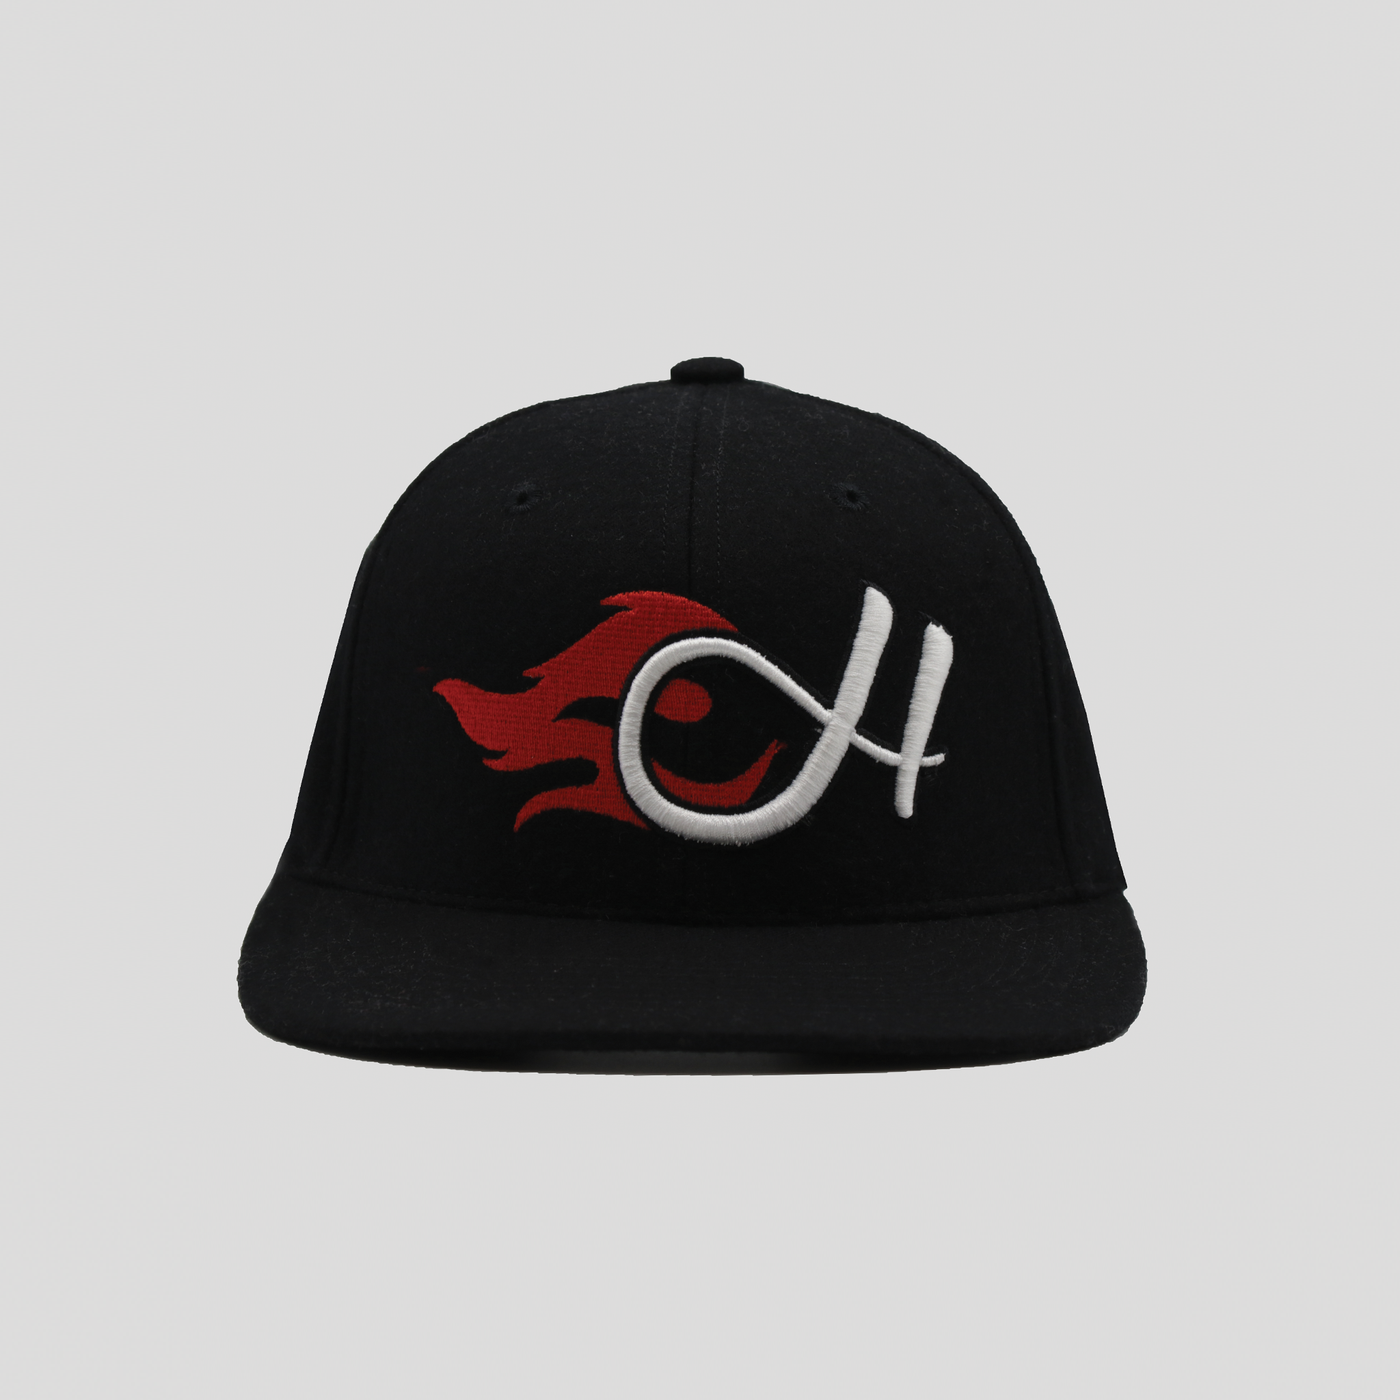 HUSH HATS "FIRE RED"